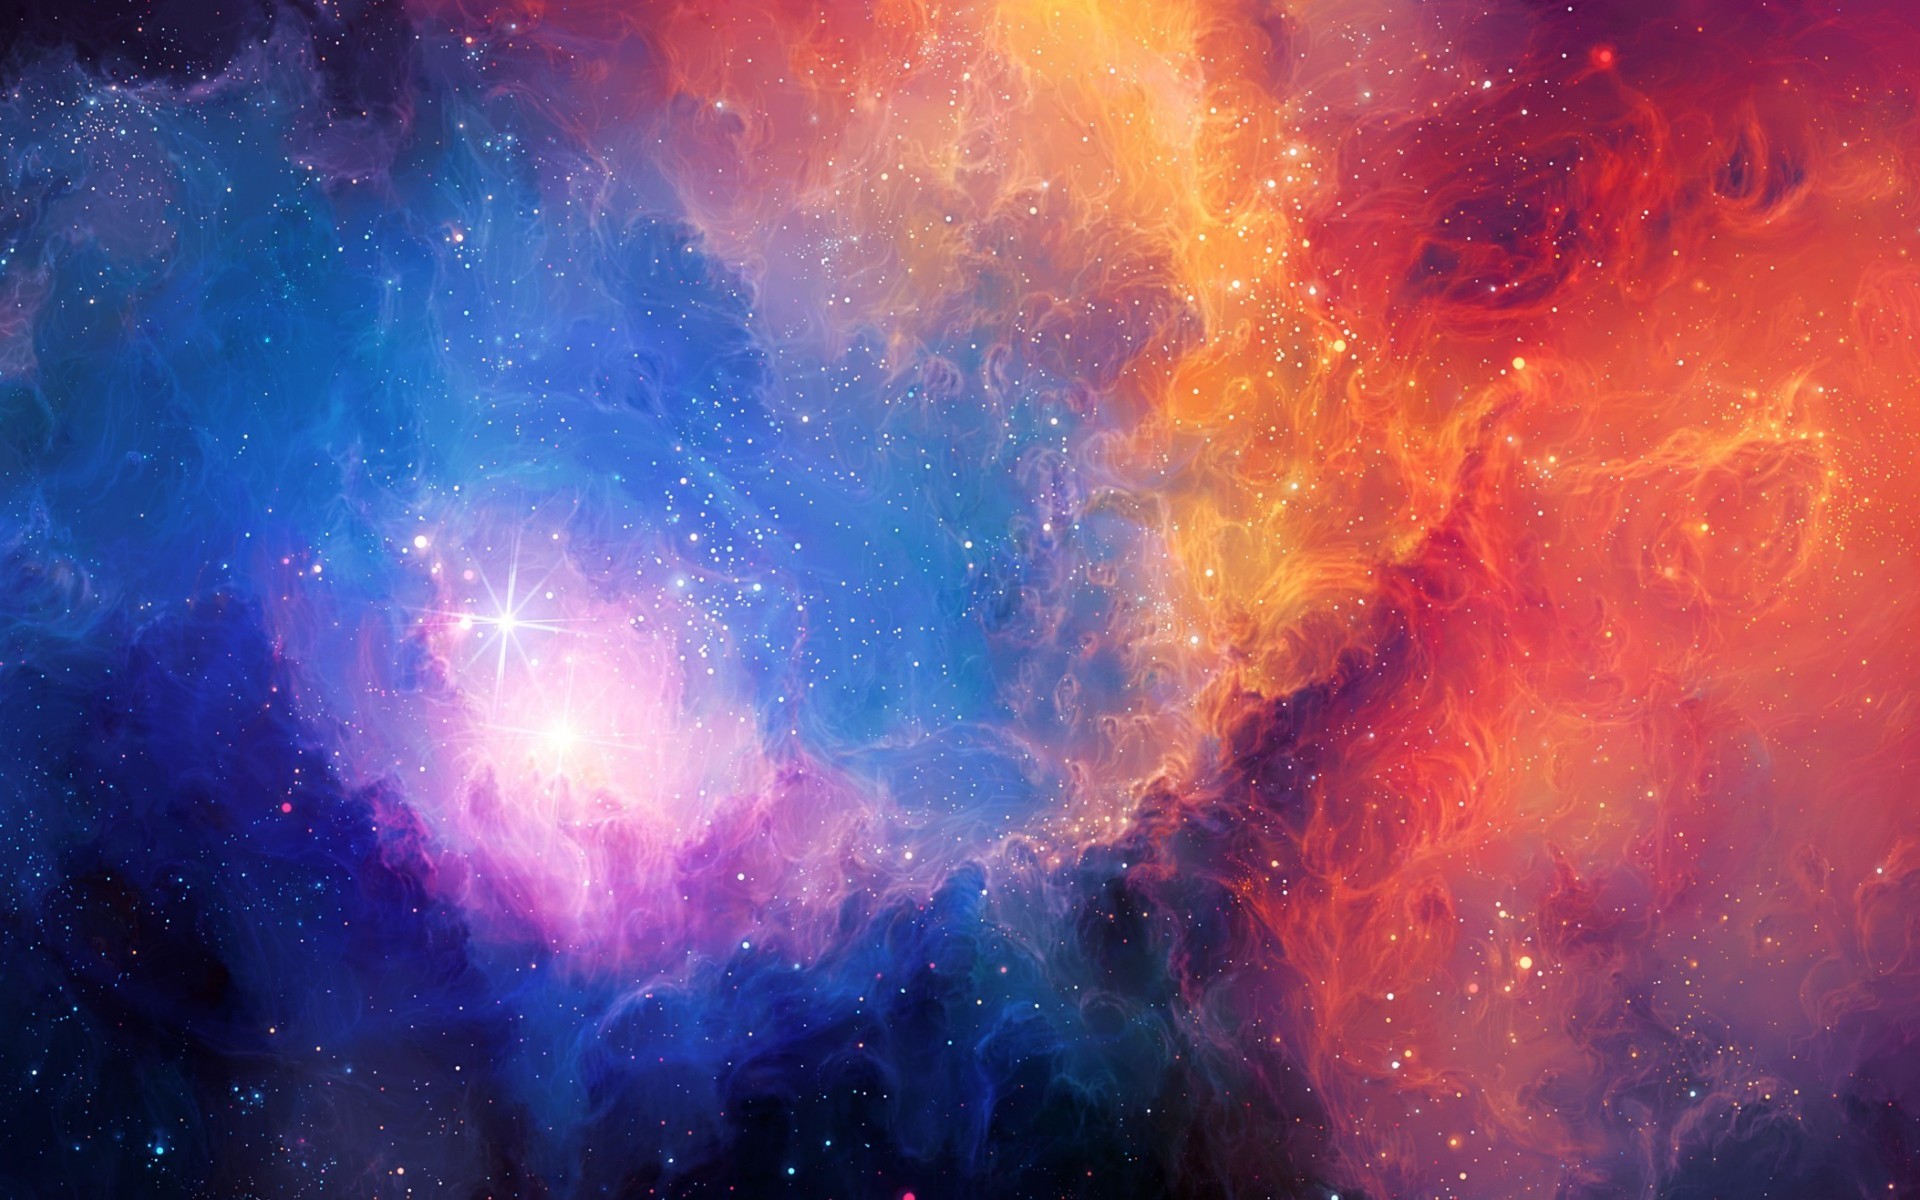 42+ Abstract Space Wallpapers: HD, 4K, 5K for PC and Mobile | Download free  images for iPhone, Android